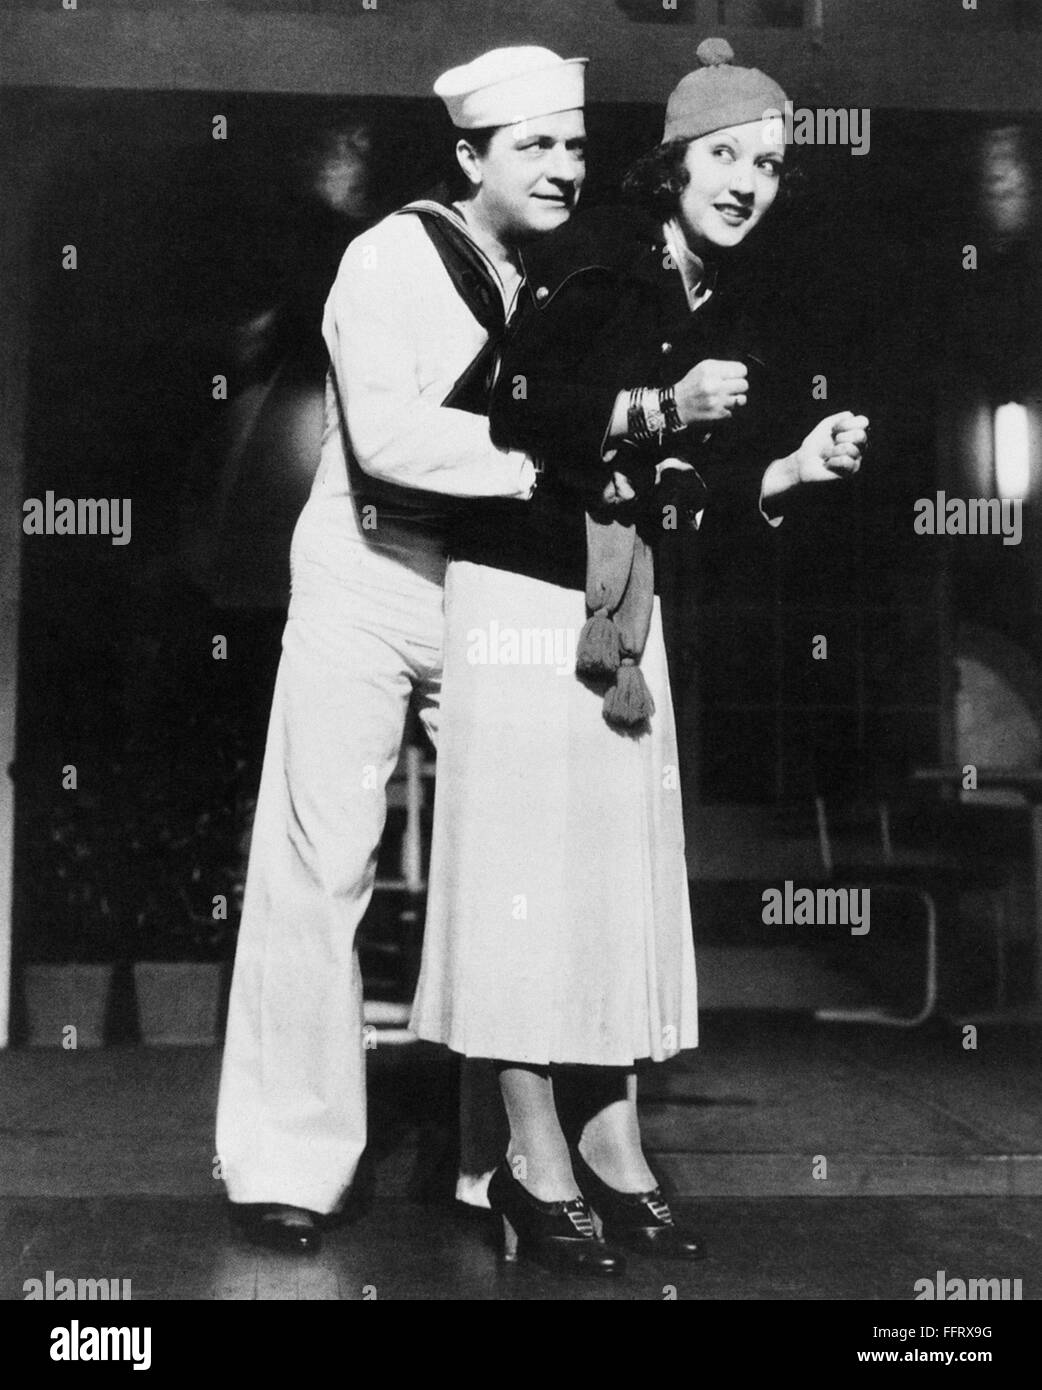 ETHEL MERMAN (1908-1984). /nAmerican actress and singer. Photographed with co-star William Gaxton during a Broadway performance of Cole Porter's musical 'Anything Goes,' 1934. Stock Photo